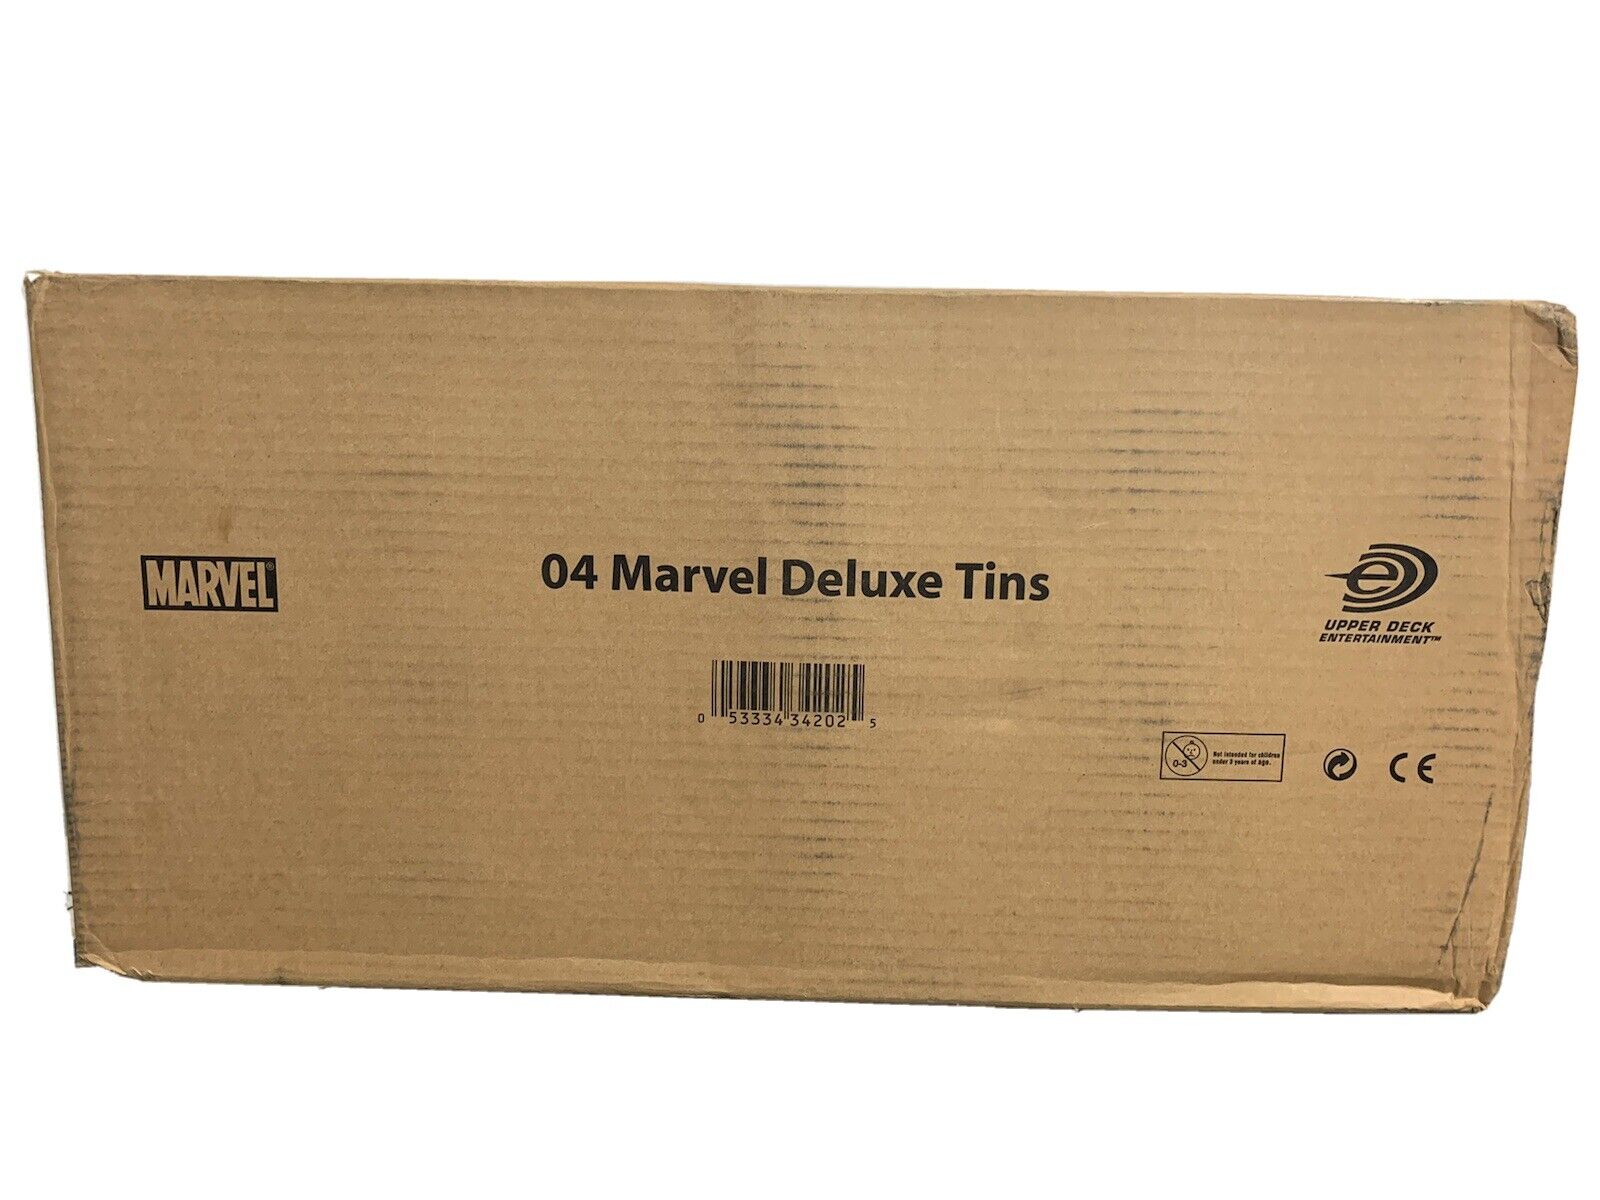 2004 MARVEL TRADING CARD GAME DELUXE COLLECTOR TINS AND GAME CARDS Case Of 12